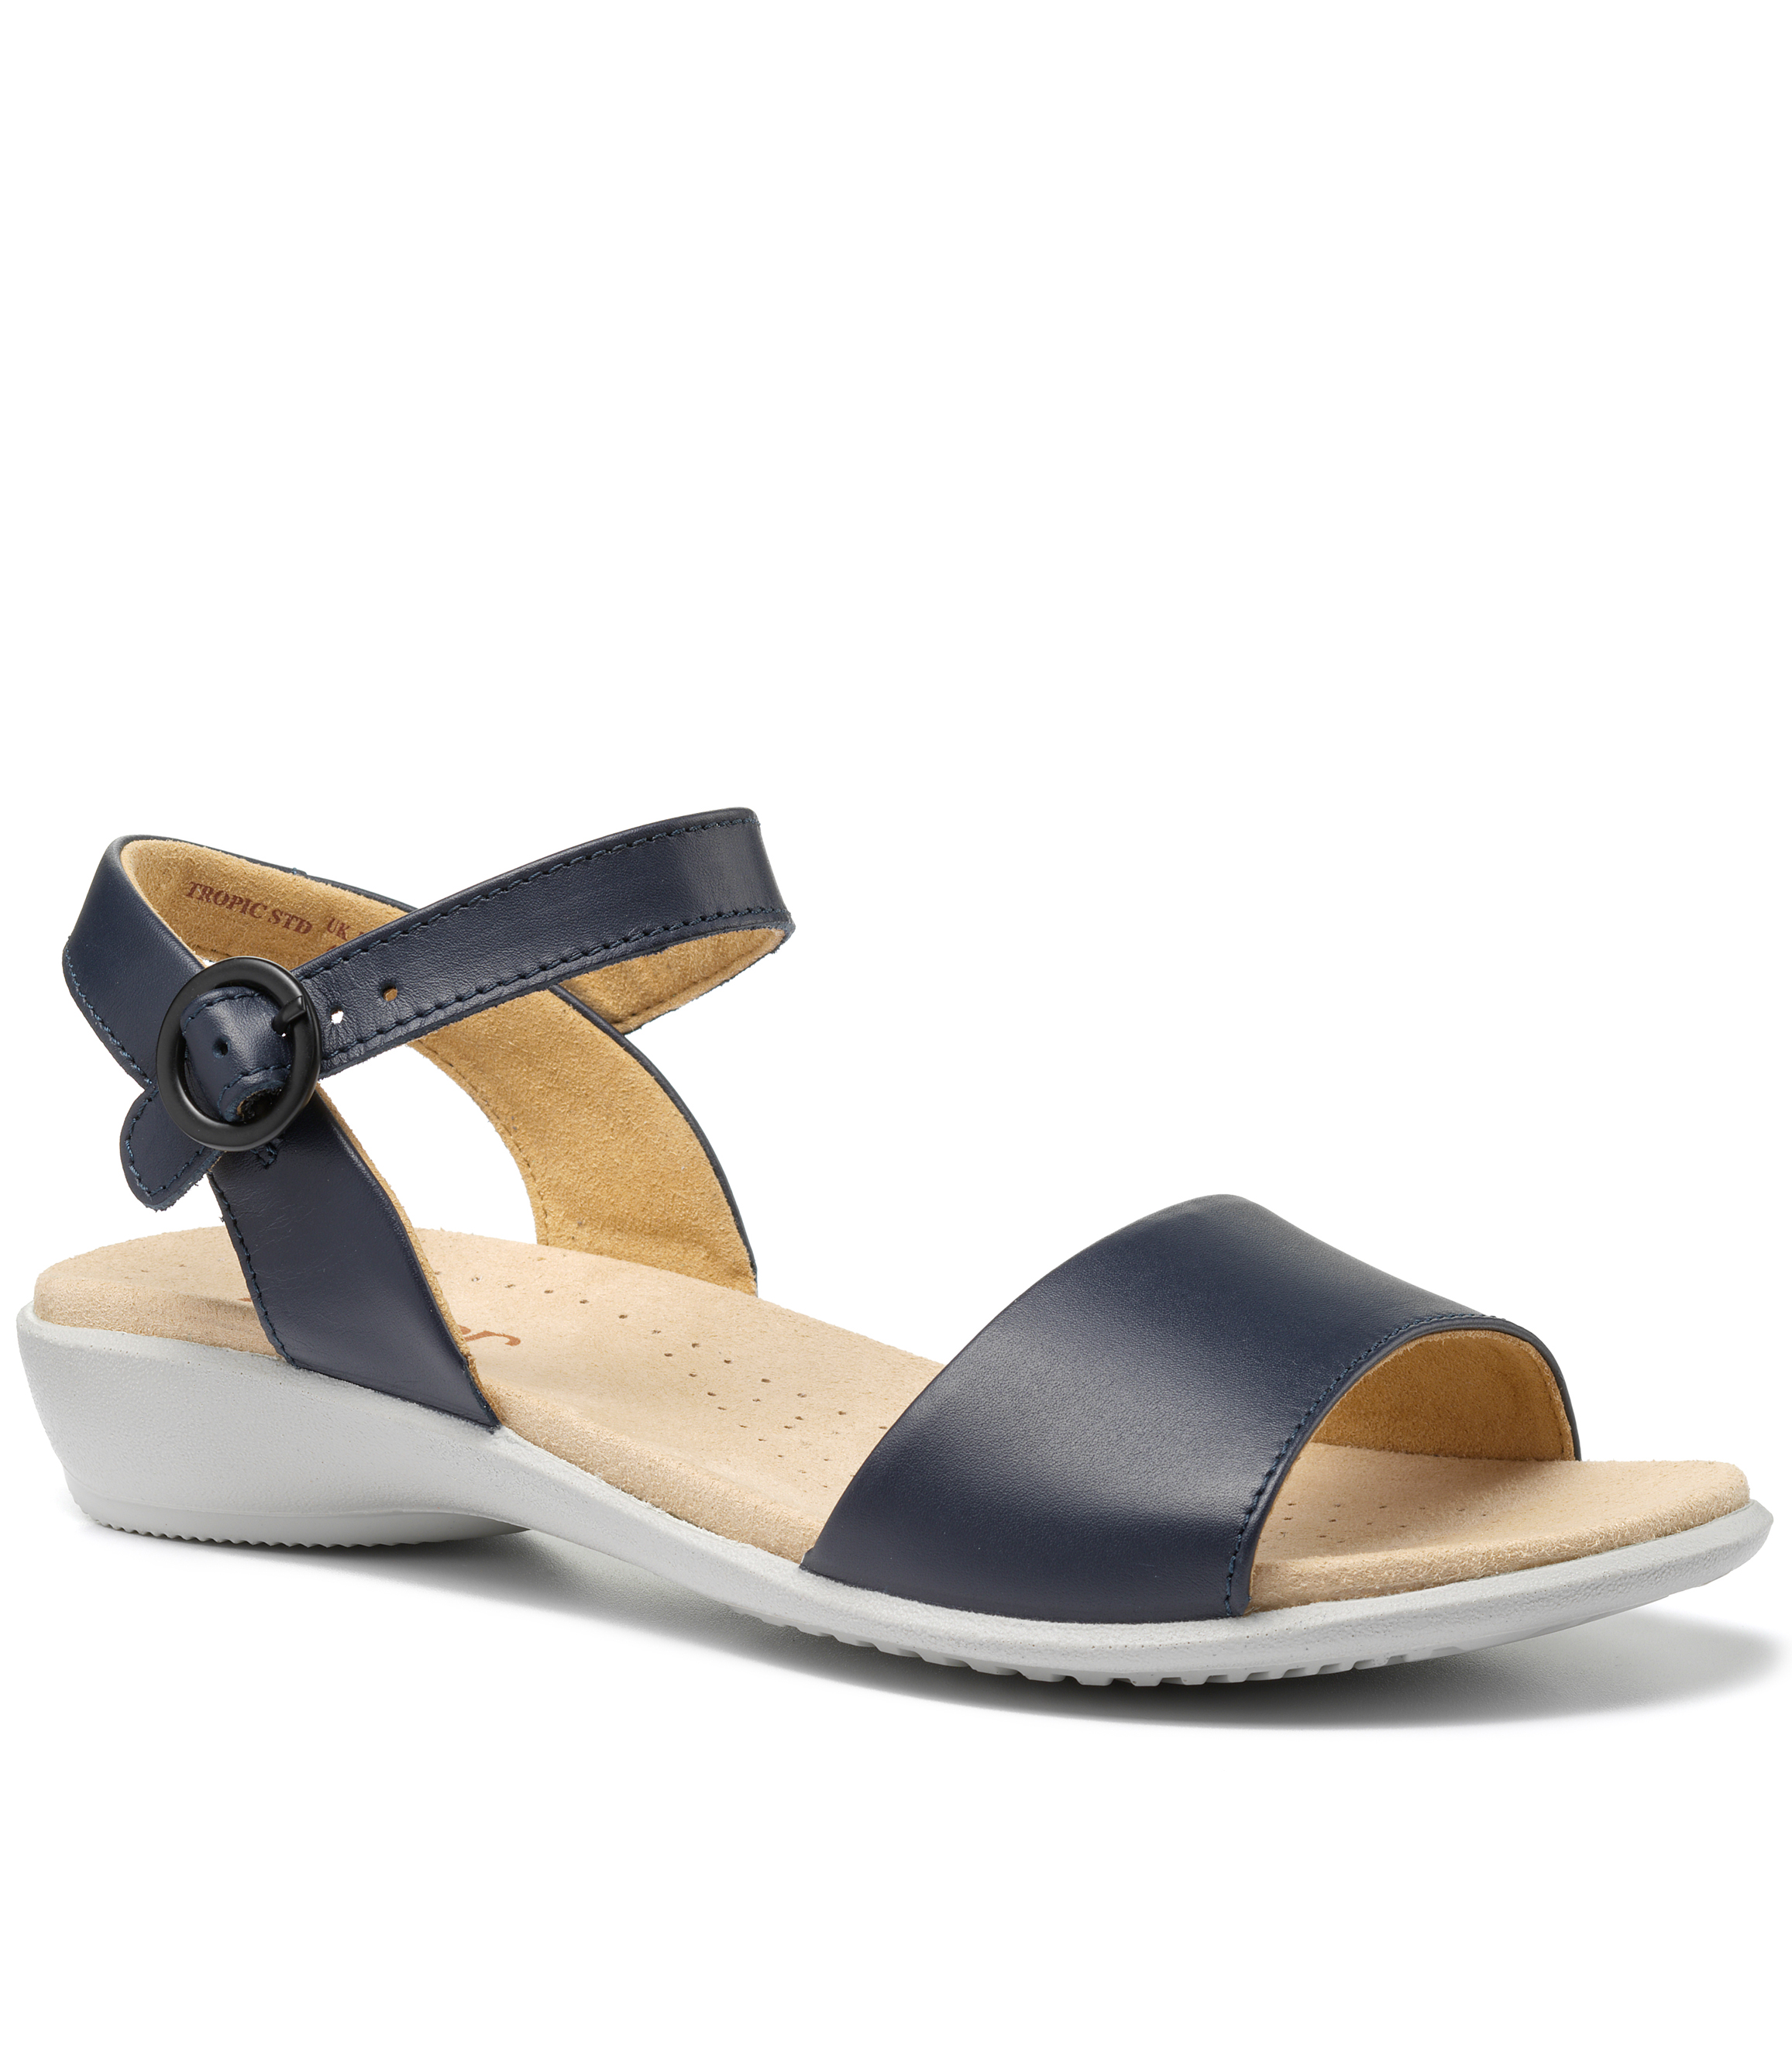 HOTTER NAVY LEATHER TROPIC SANDAL | Rosella - Style inspired by elegance